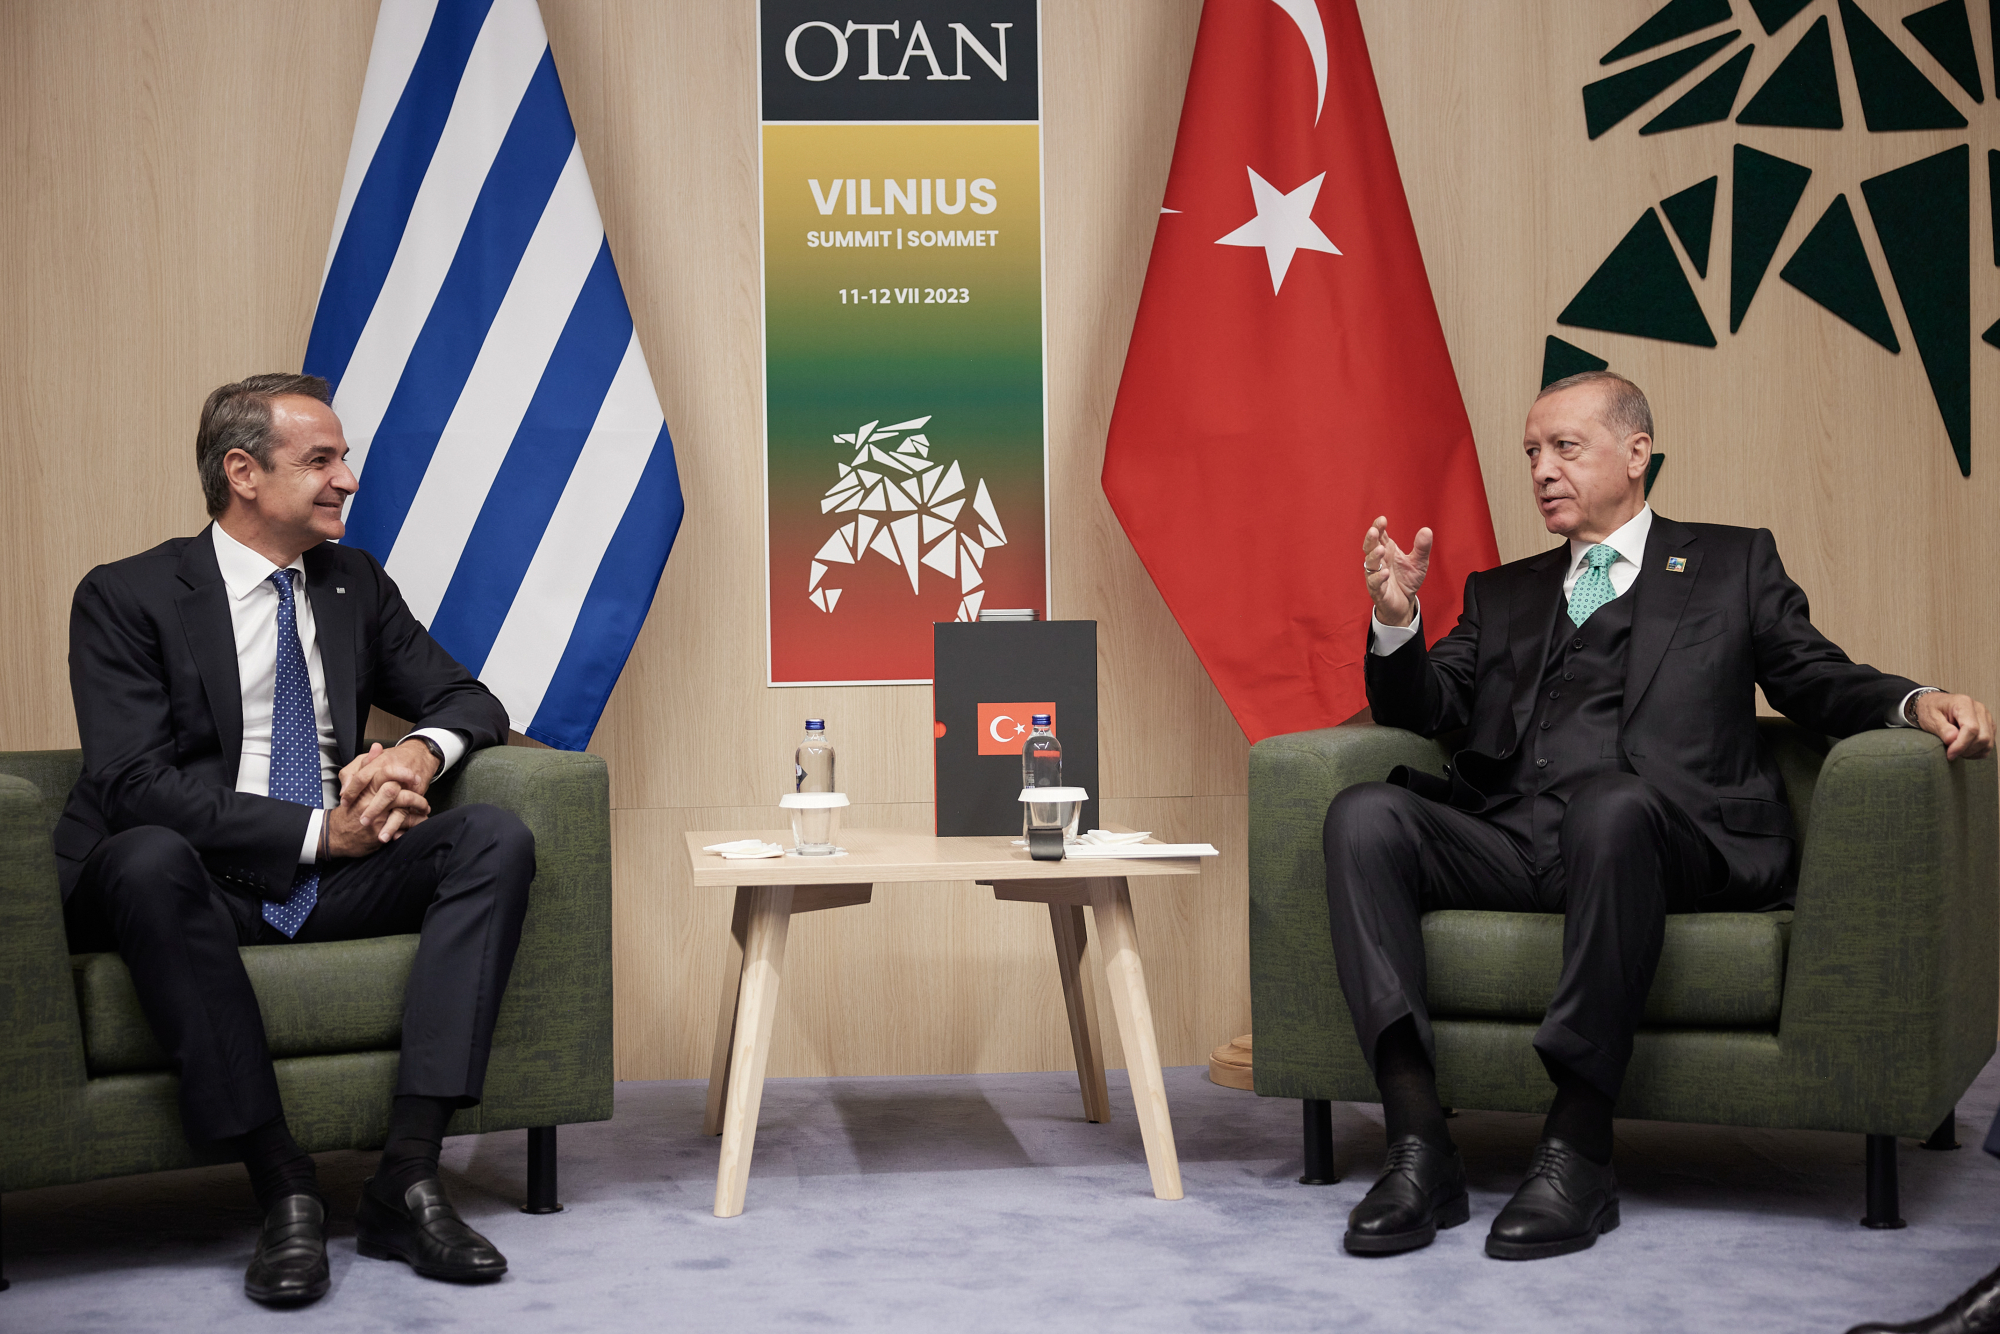 Recep Tayyip Erdogan: We want to take positive steps with Mitsotakis – what he said about Rhodope